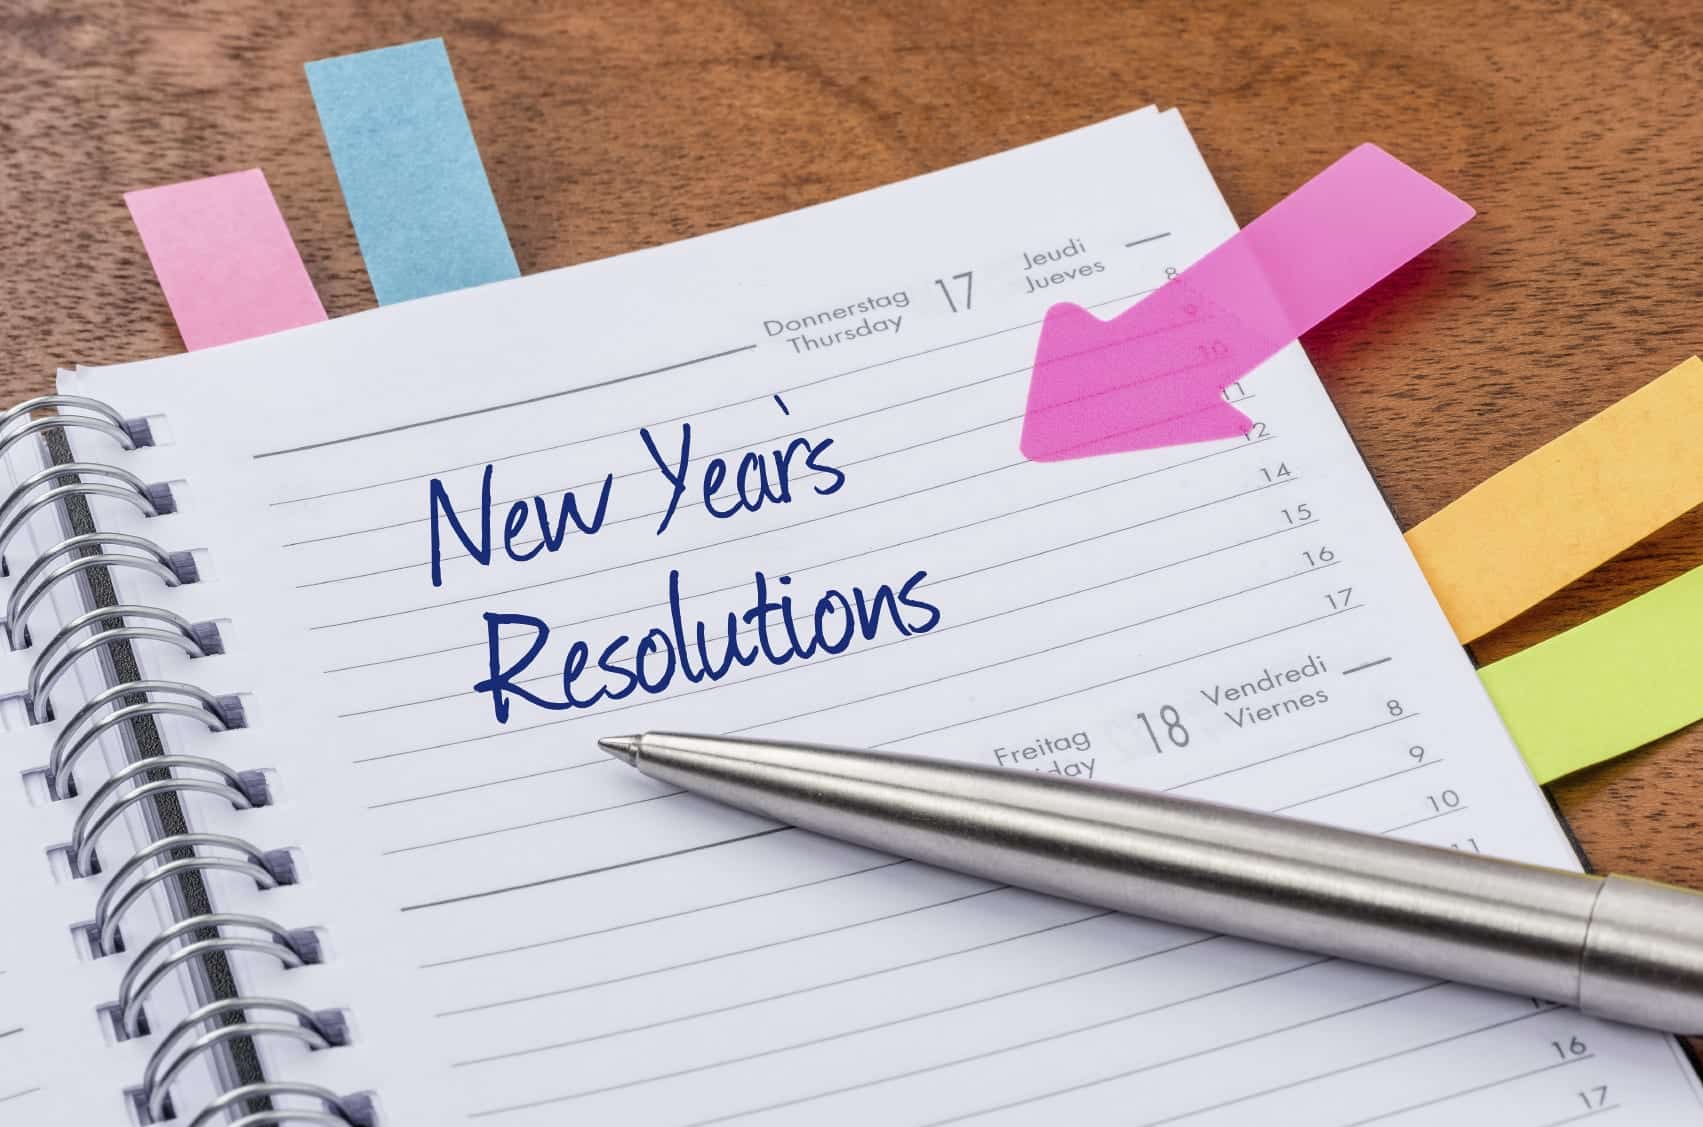 5 Small Business Resolutions to Make This Year